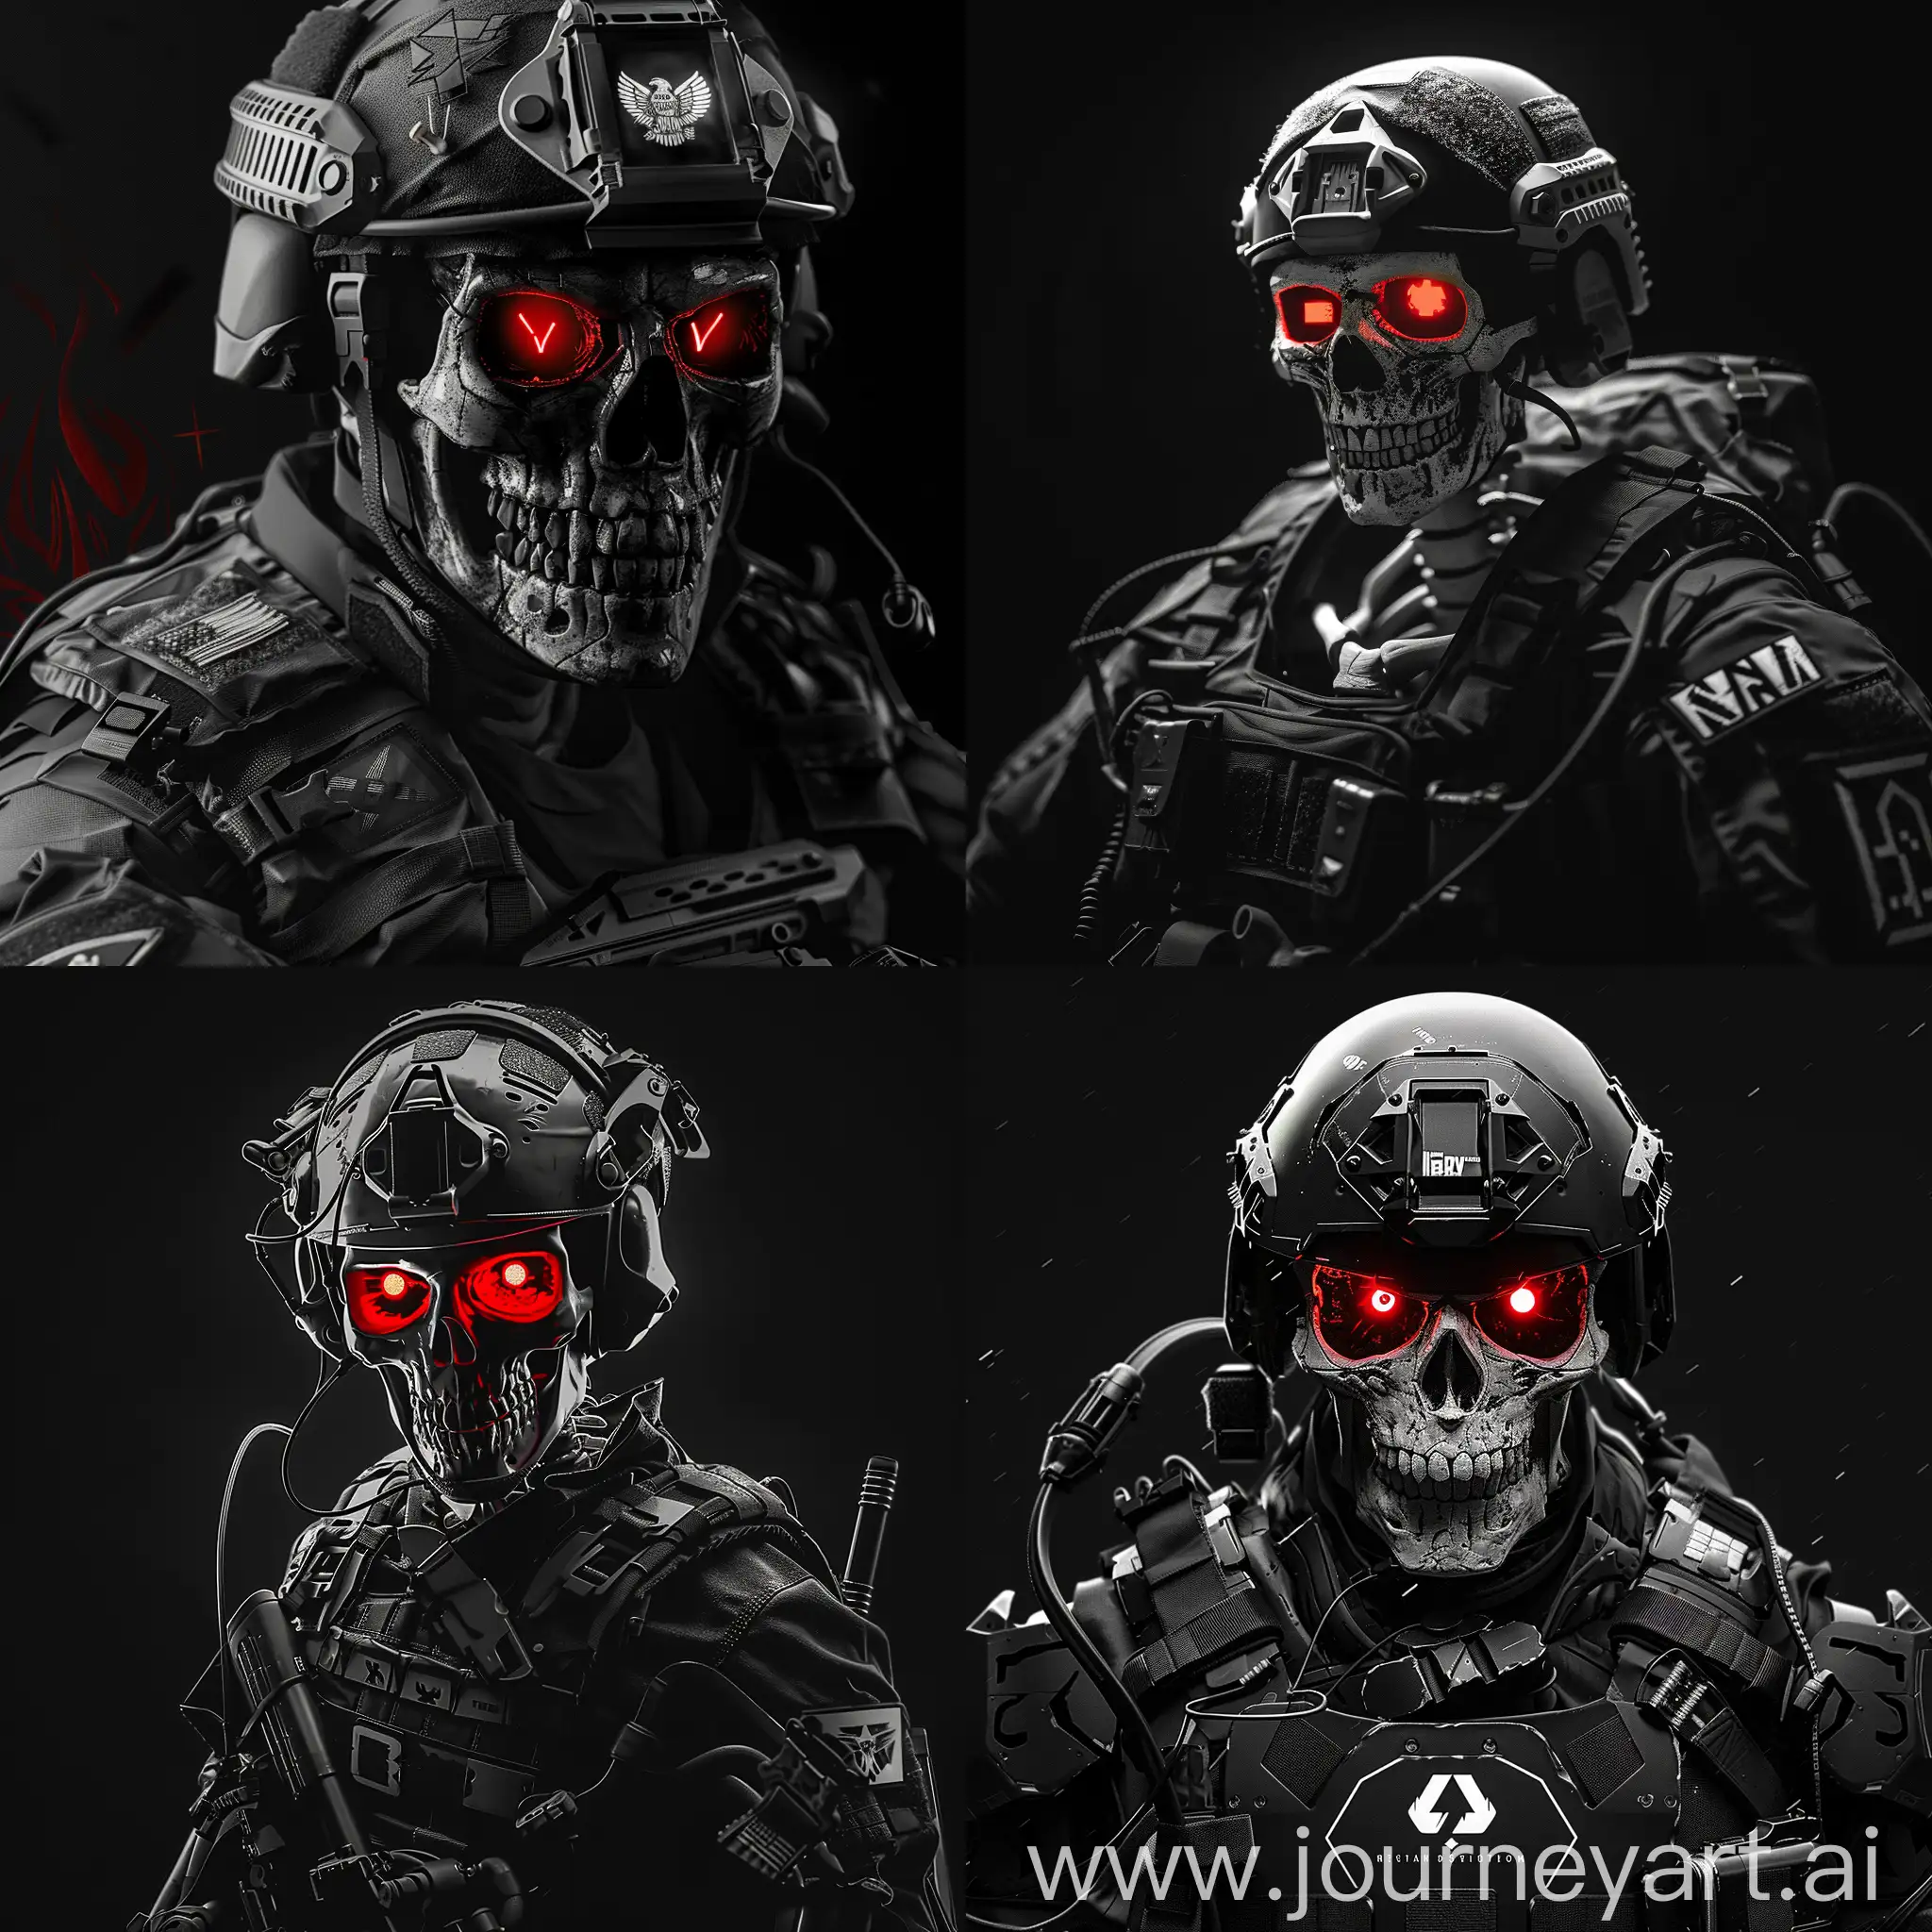 Modern-Undead-Soldiers-Skeletons-in-Military-Gear-with-Glowing-Red-Eyes